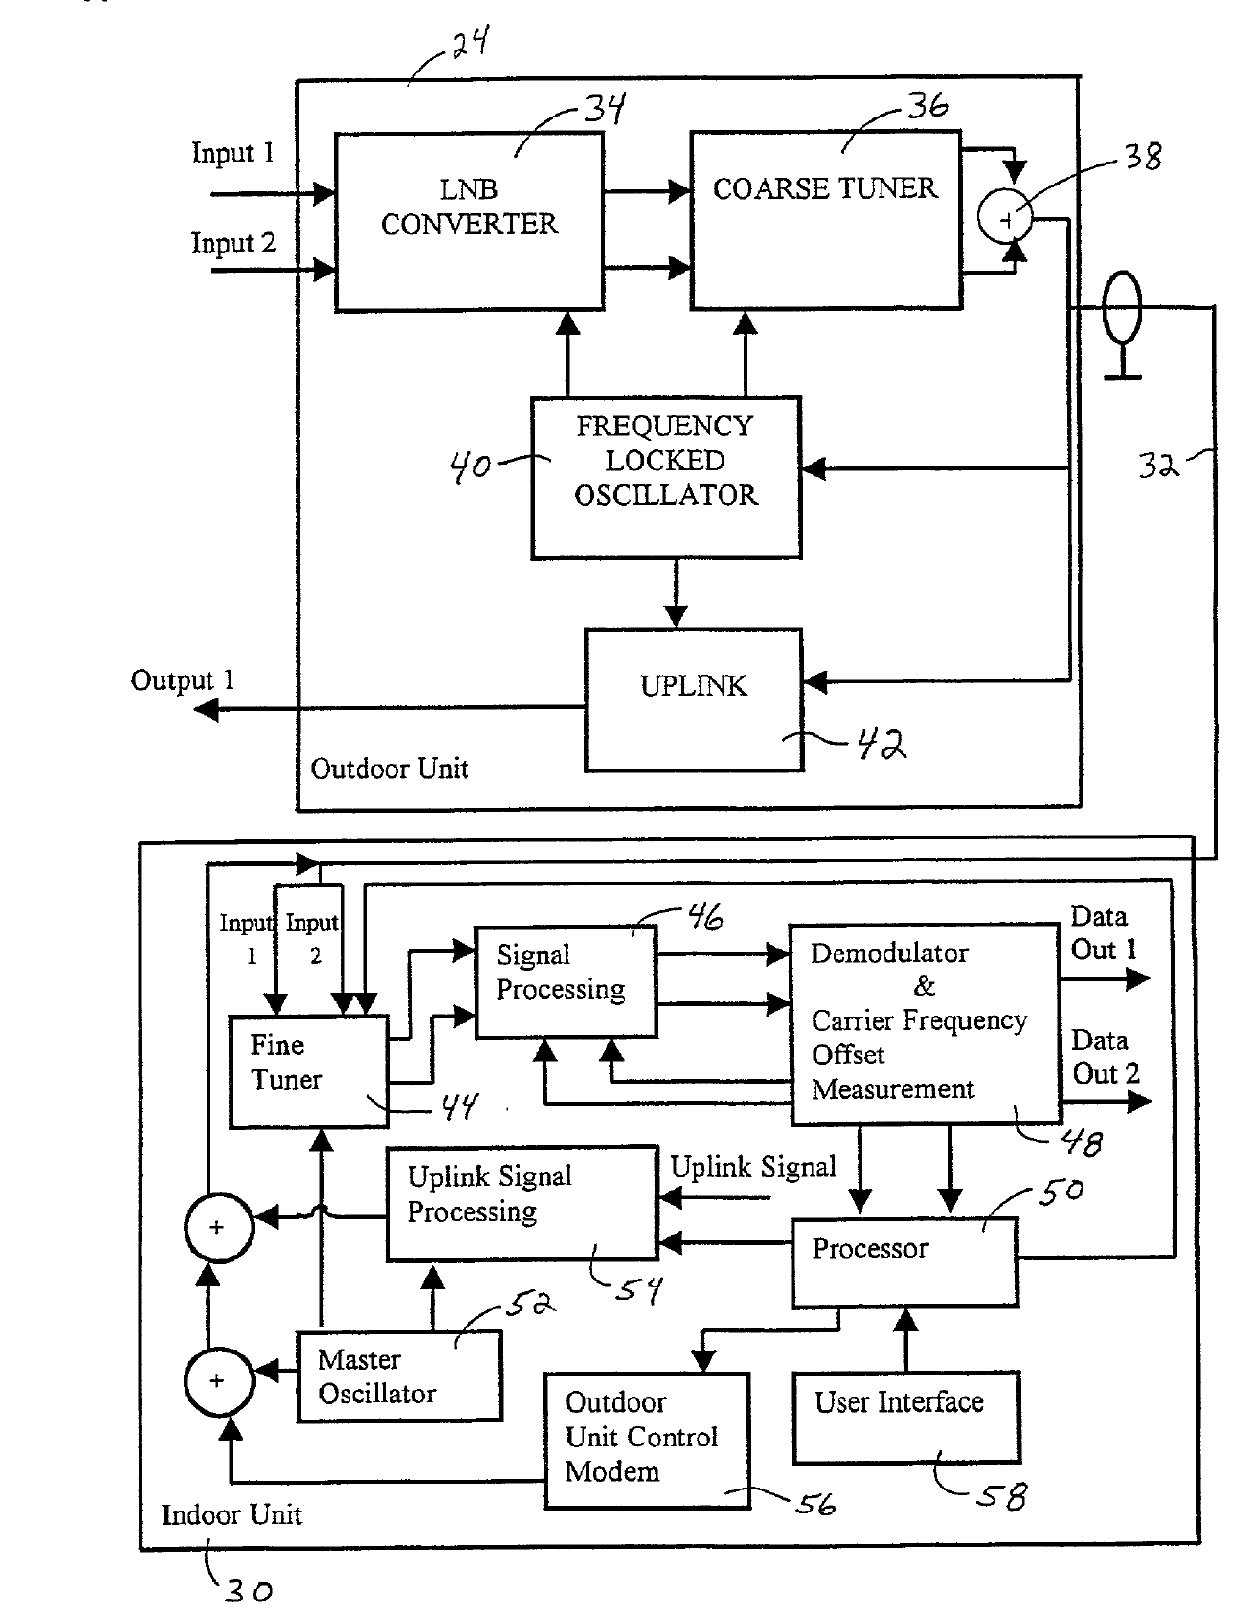 Satellite television system ground station having wideband multi-channel LNB converter/transmitter architecture with controlled uplink transmission